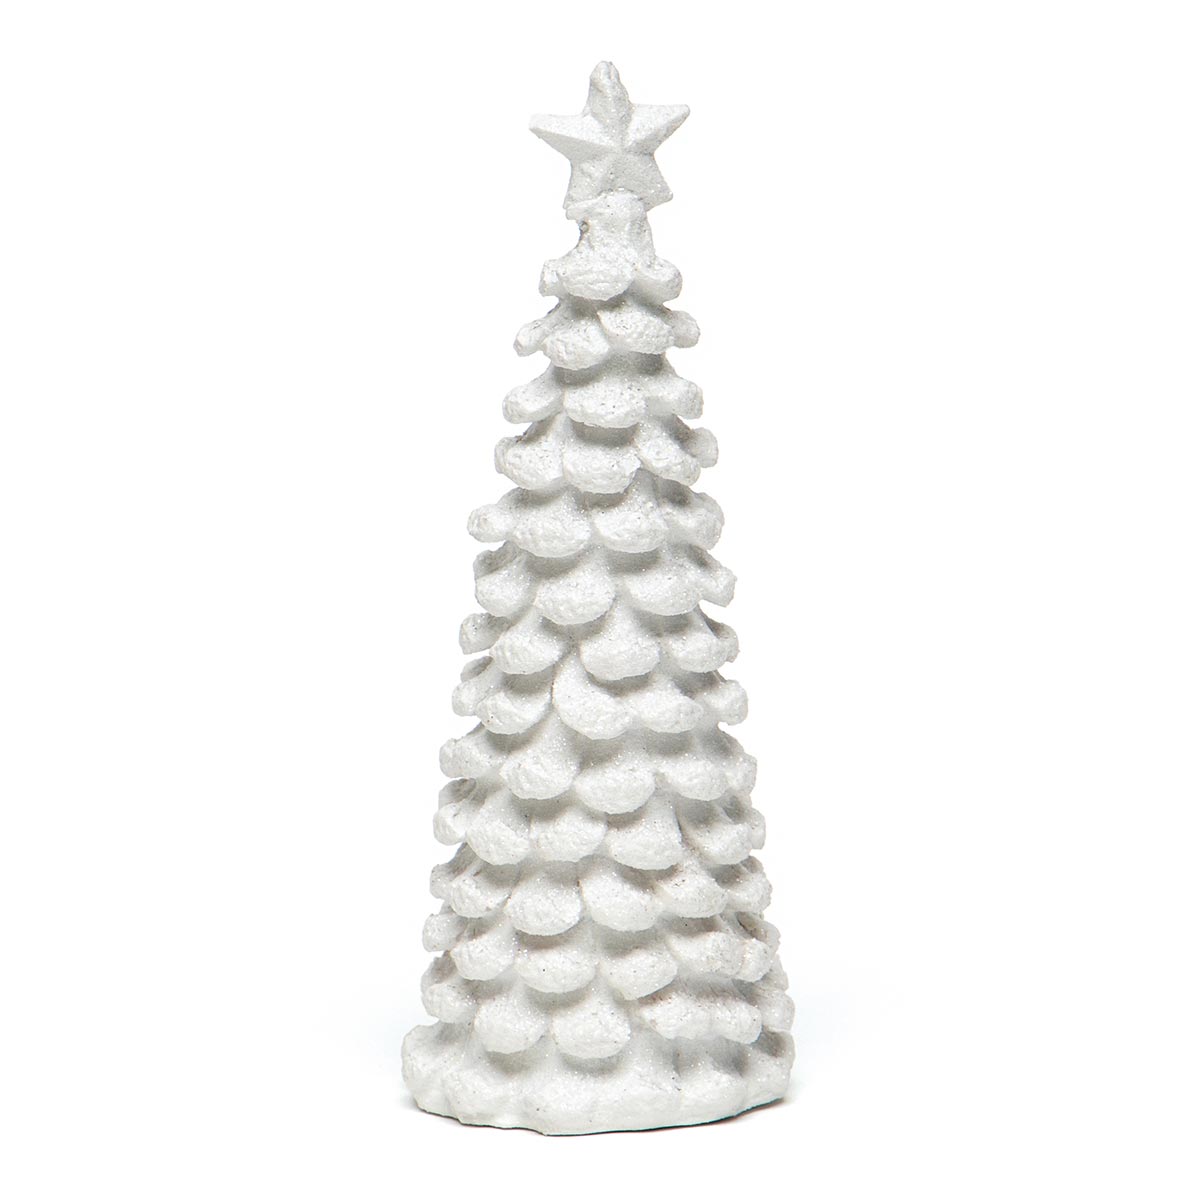 !MINI RESIN TREE WHITE WITH STAR AND GLITTER